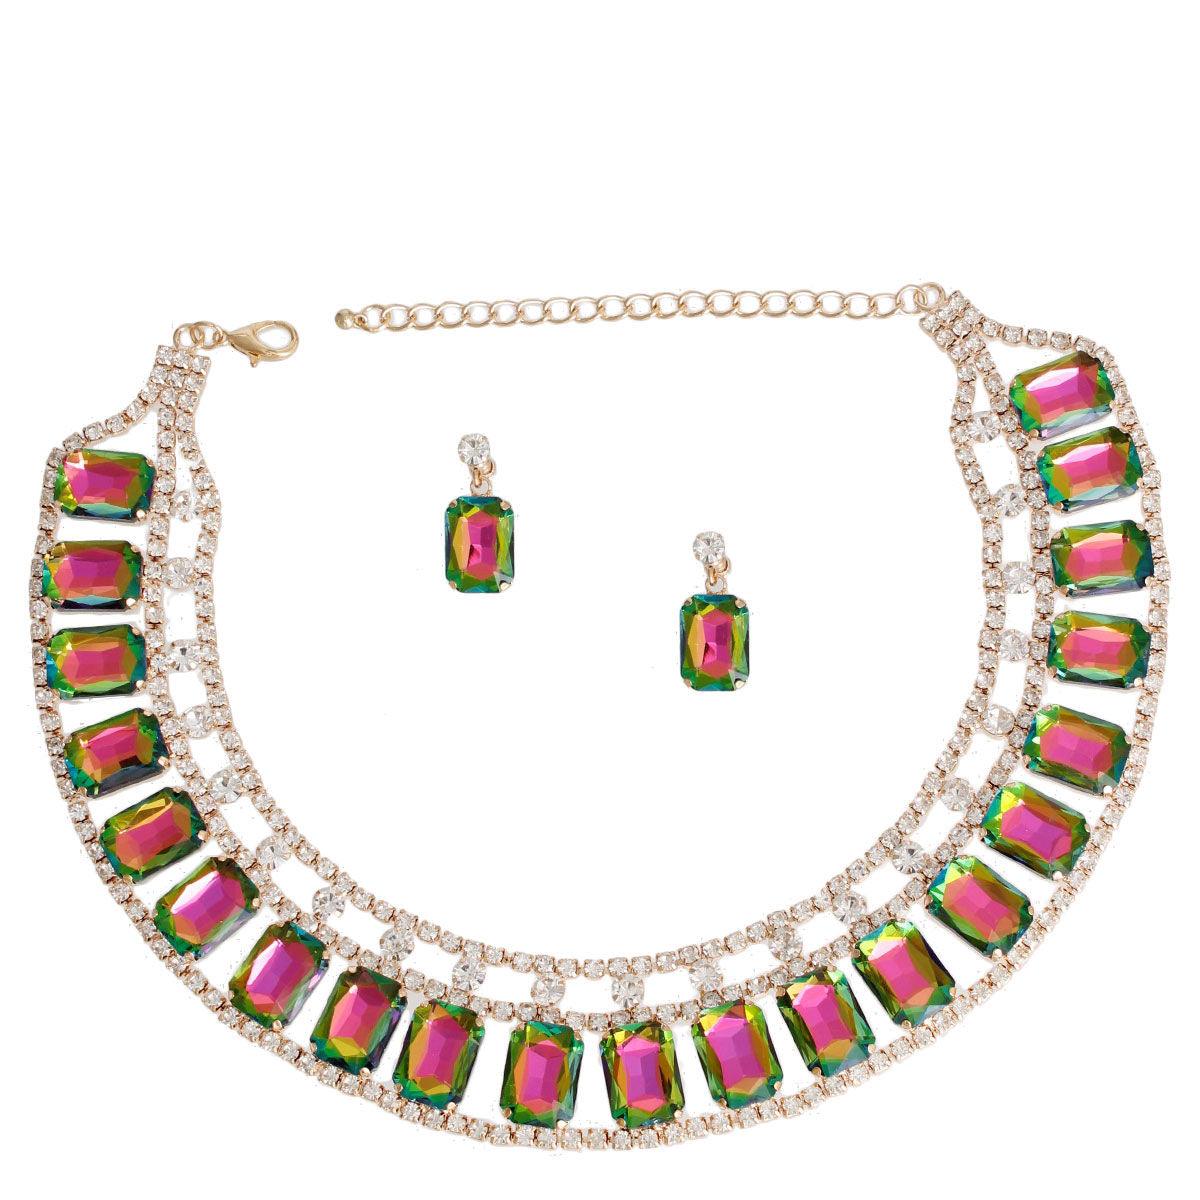 Pink and Green Collar Necklace, Earrings Set: A Stylish Duo